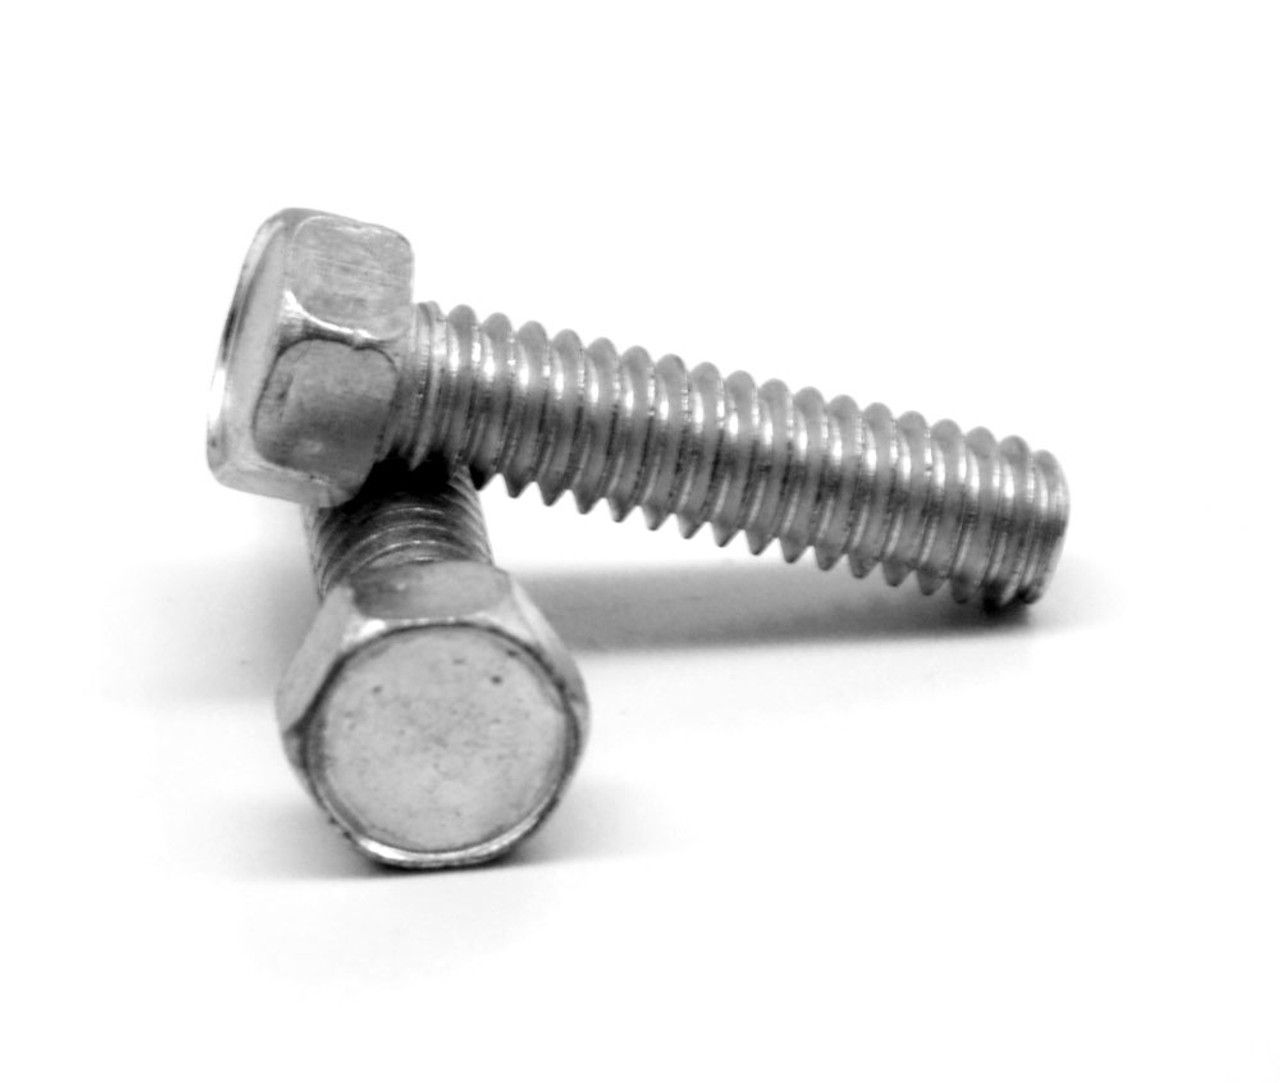 #10-24x1/4" (FT) Coarse Thread Machine Screw Indented Hex Head Low Carbon Steel Zinc Plated